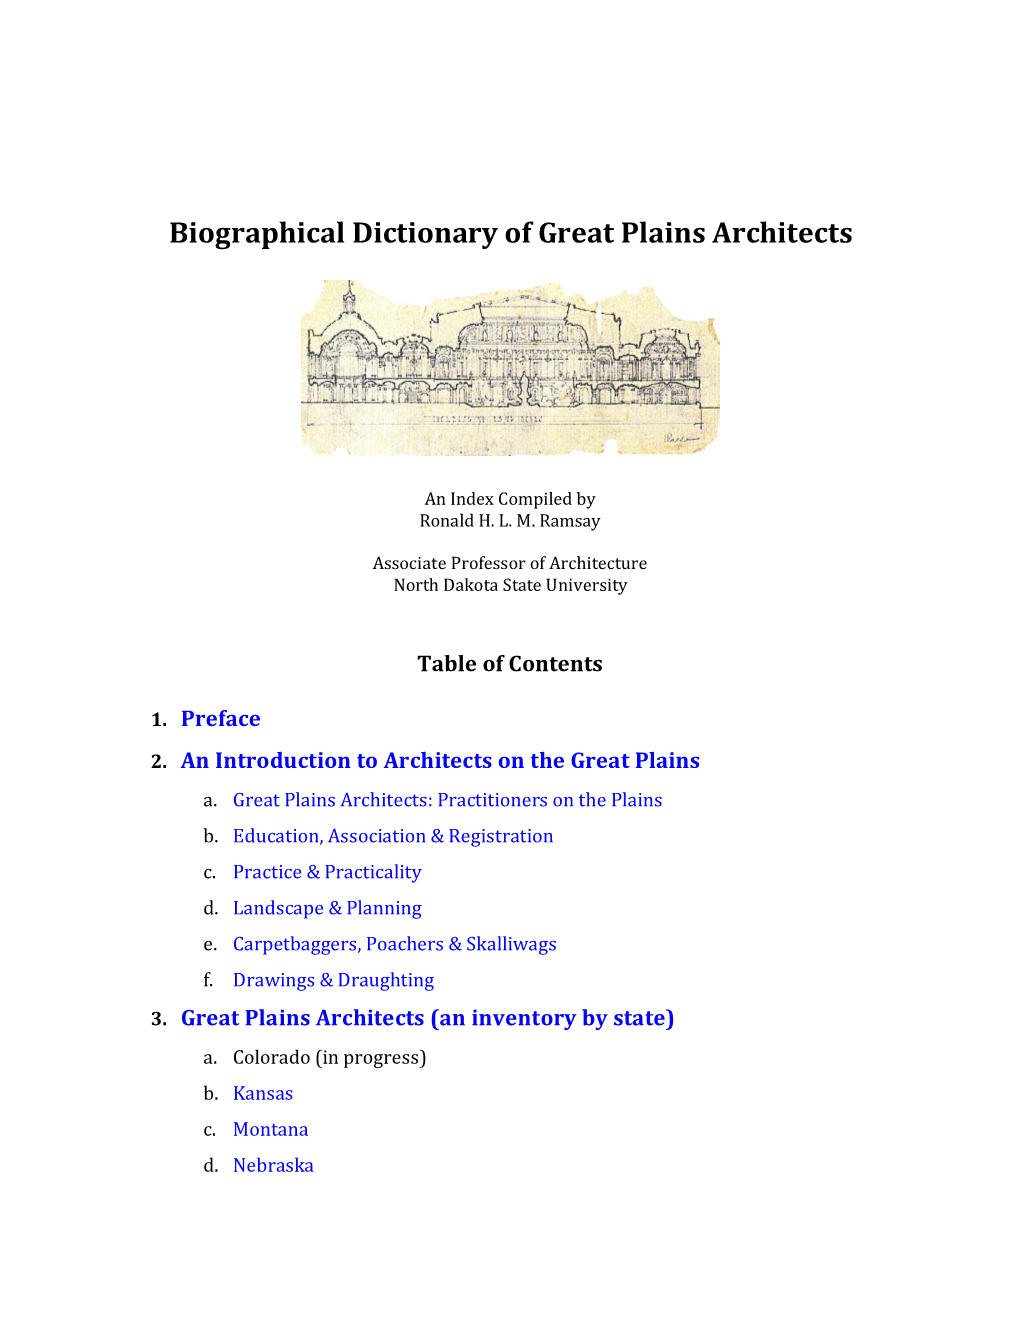 Biographical Dictionary of Great Plains Architects